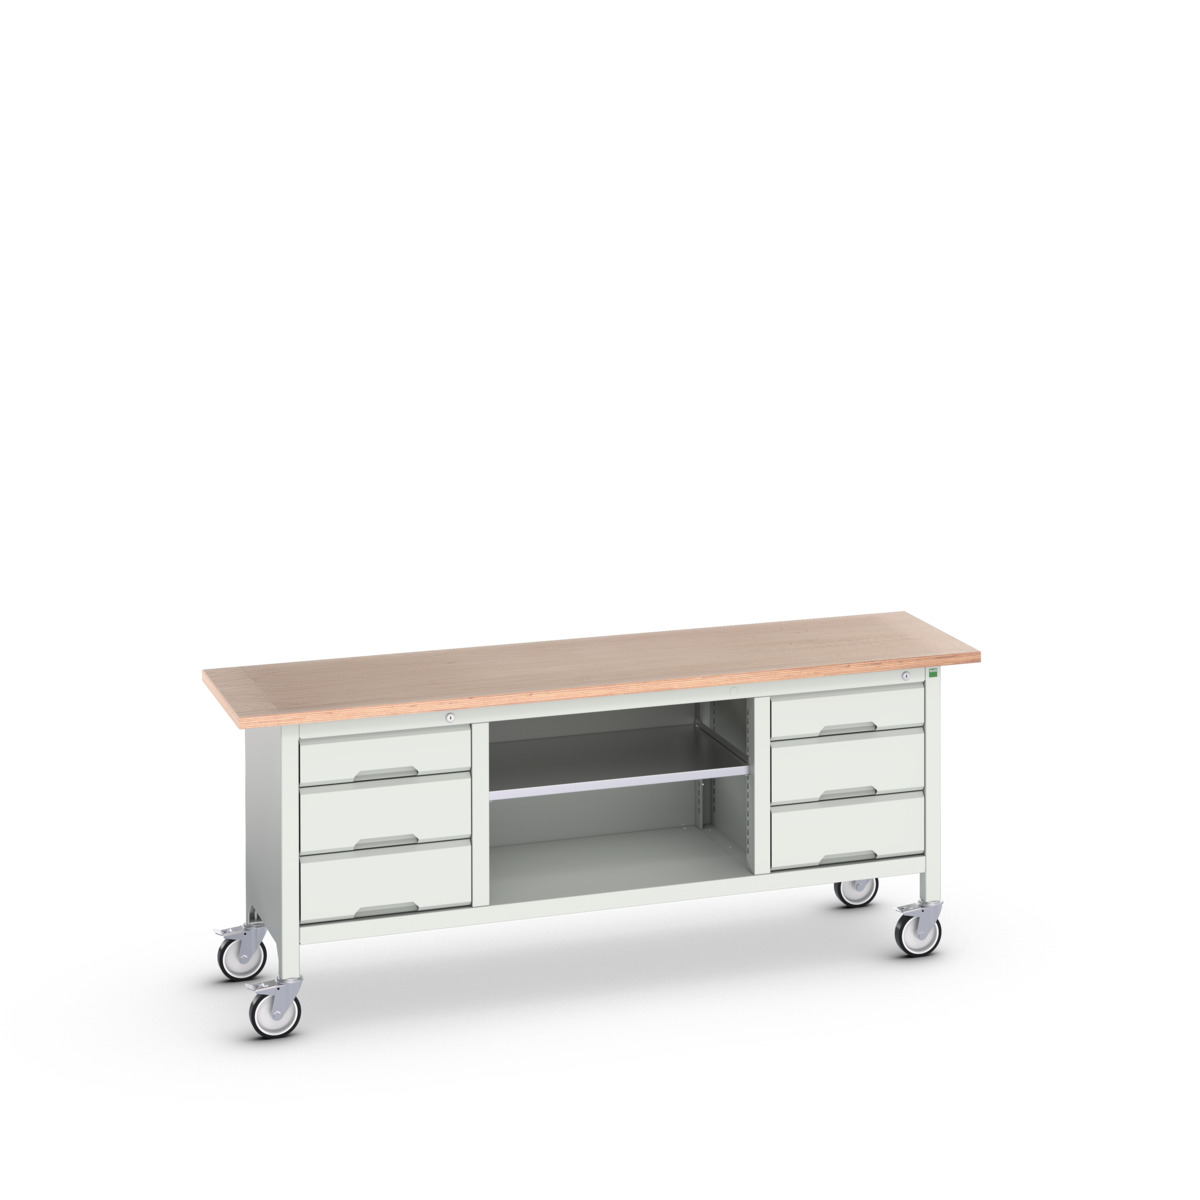 16923234.16 - verso mobile storage bench (mpx)